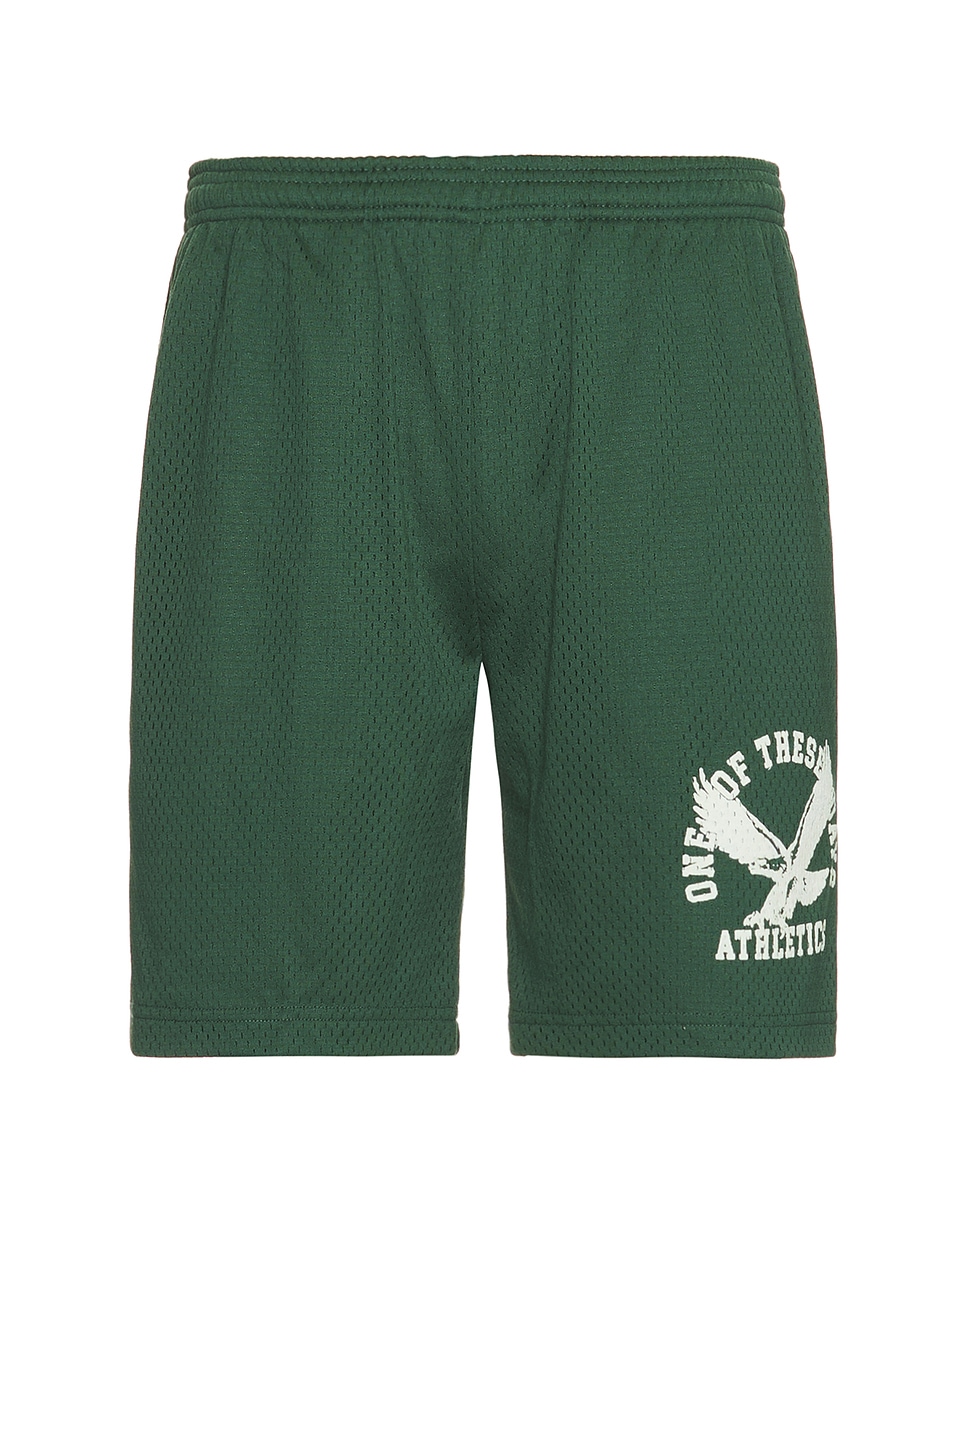 Image 1 of ONE OF THESE DAYS Athletic Short in Forest Green